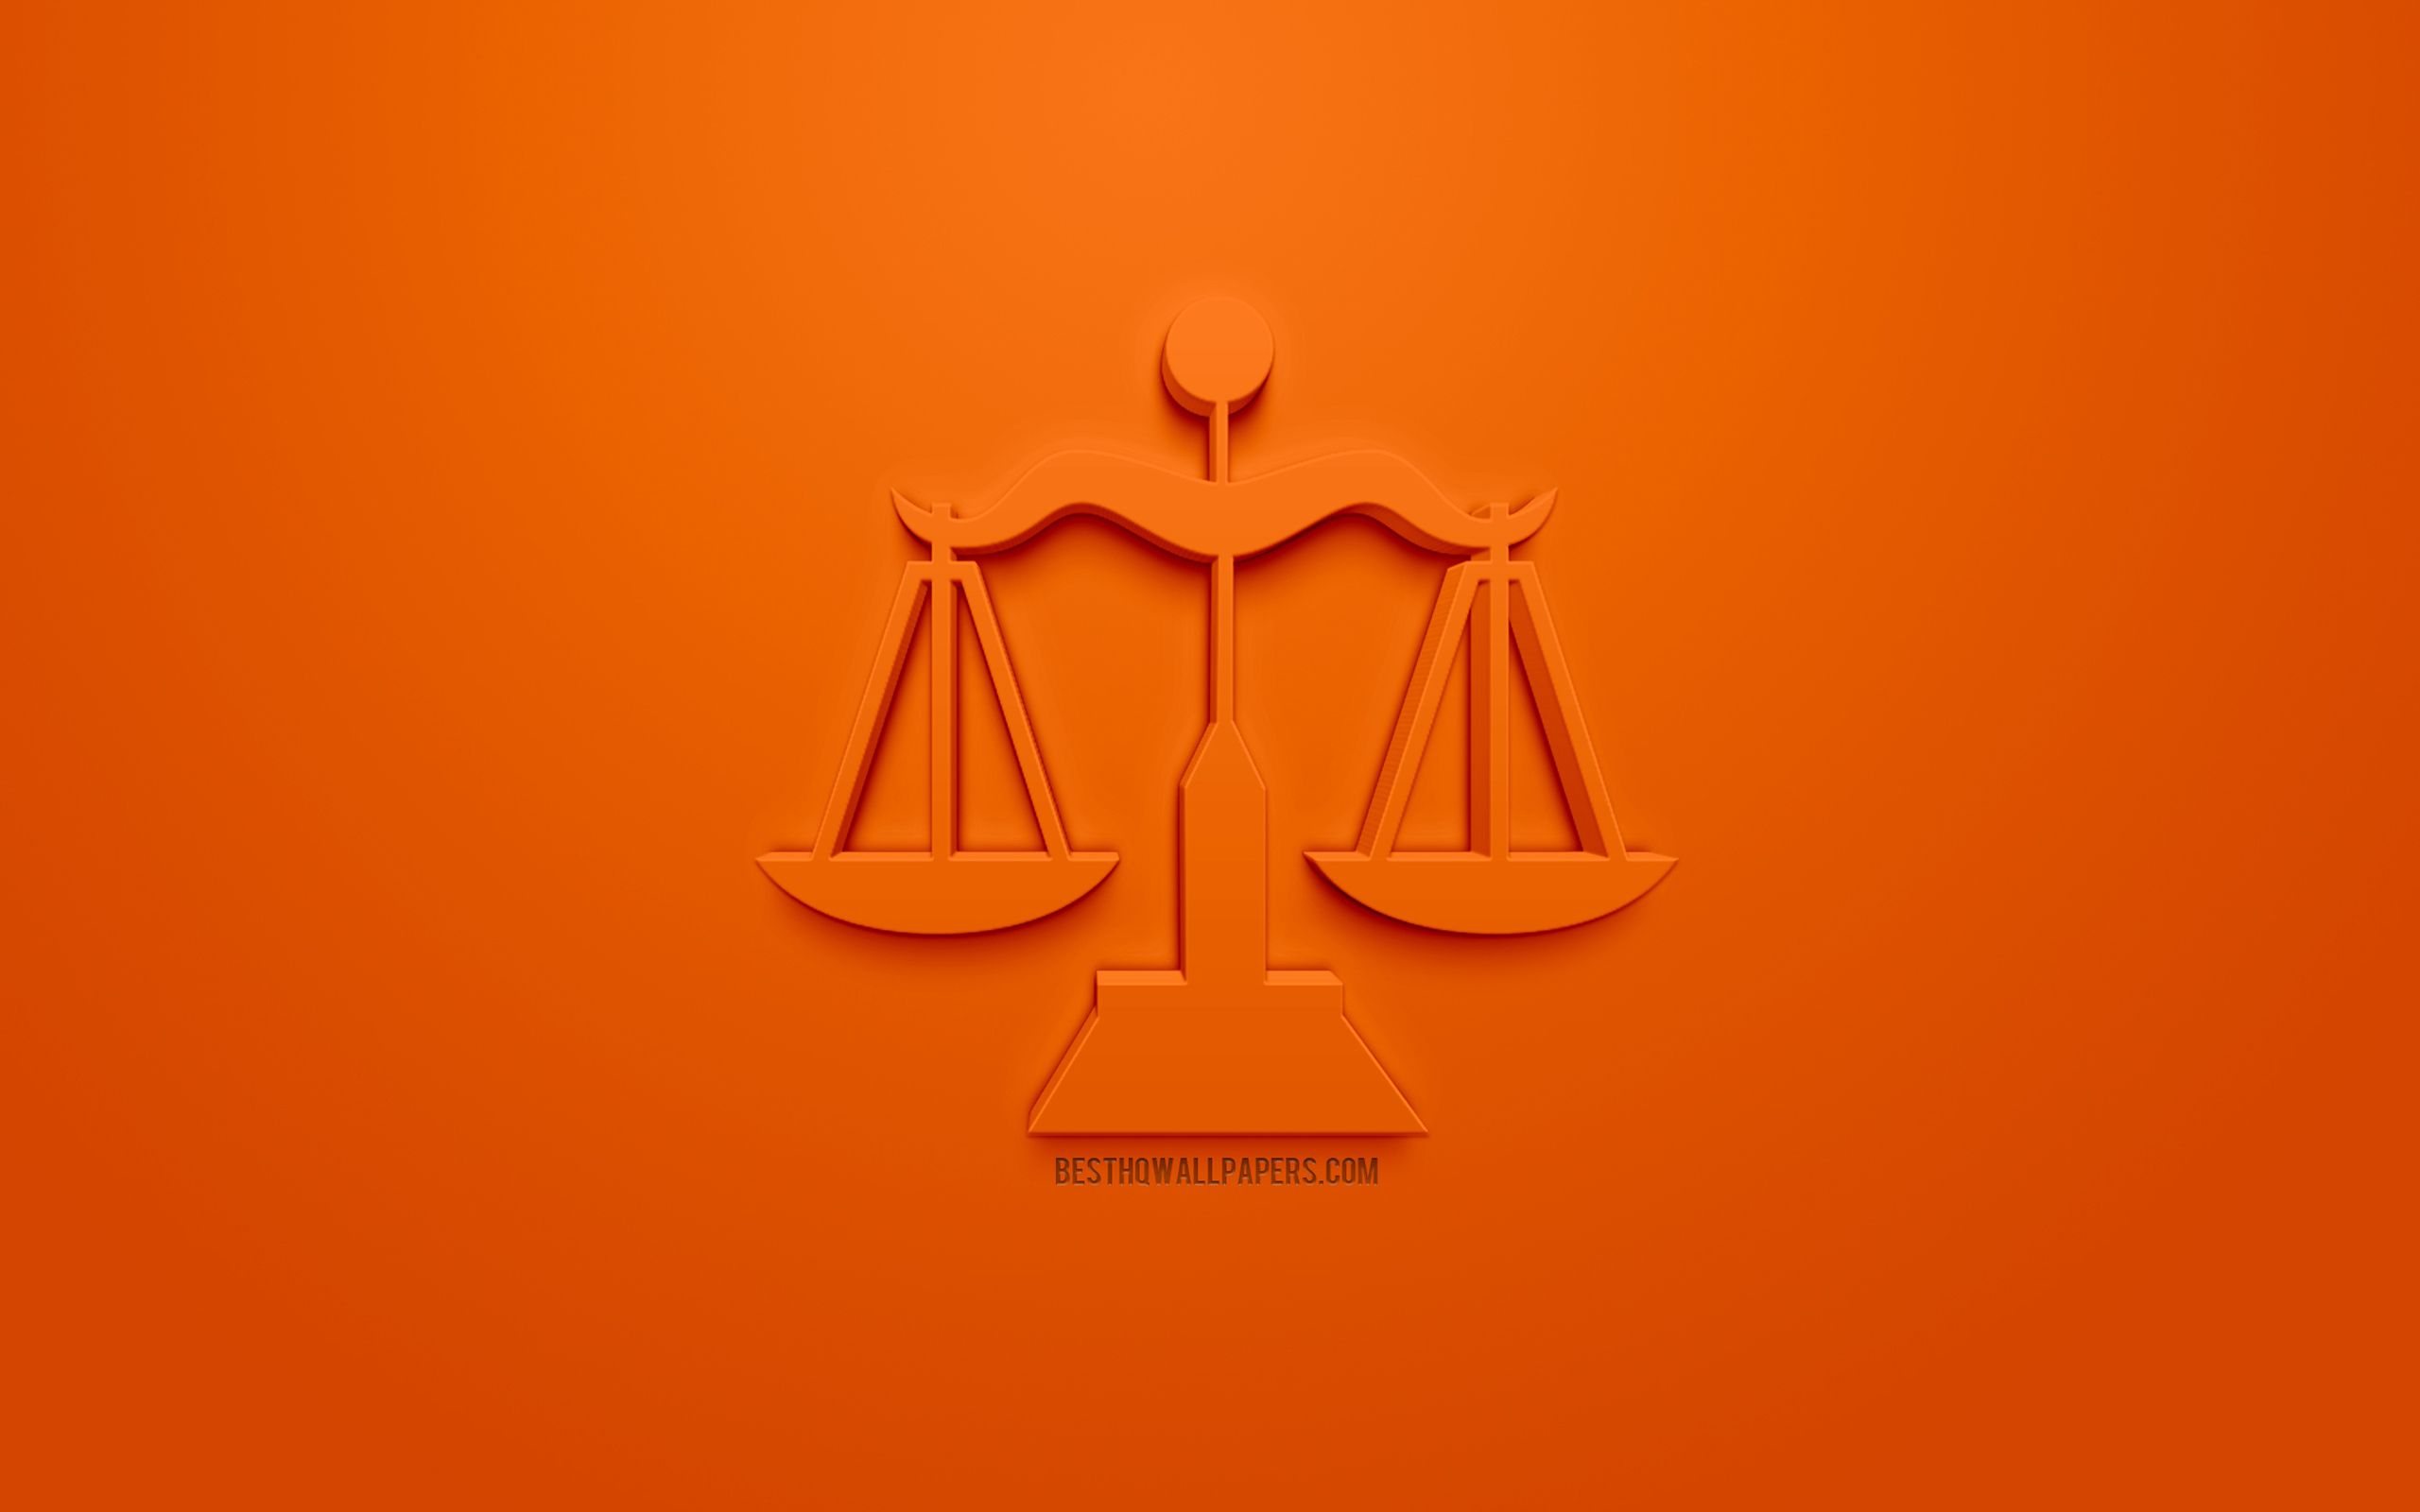 Download wallpaper Libra zodiac sign, 3D zodiac signs, astrology, Libra, 3D astrological sign, orange background, creative 3D art, Libra Horoscope for desktop with resolution 2560x1600. High Quality HD picture wallpaper